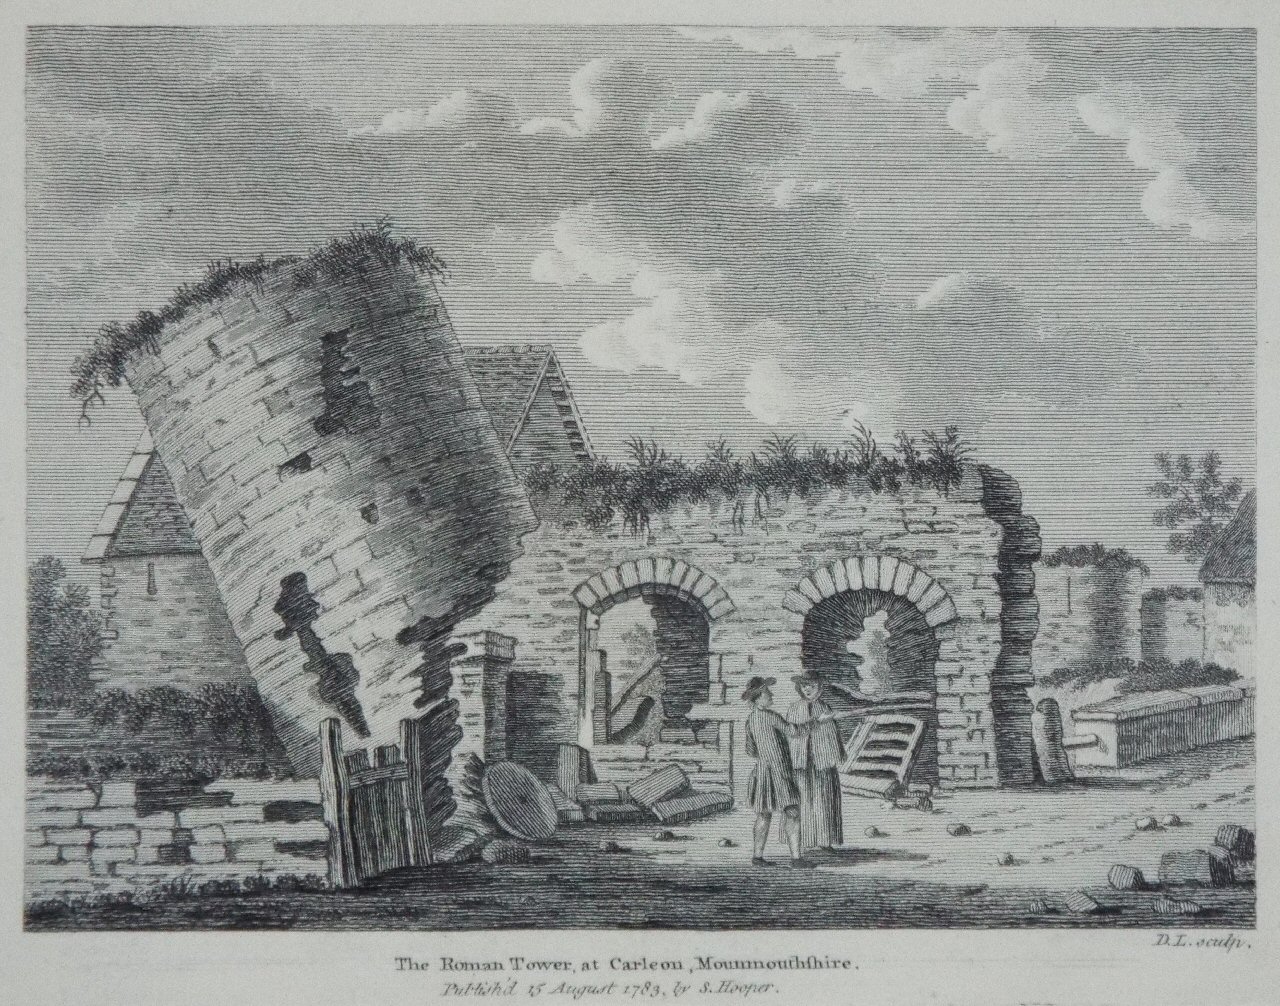 Print - The Roman Tower, at Carleon, Monmouthshire. - D